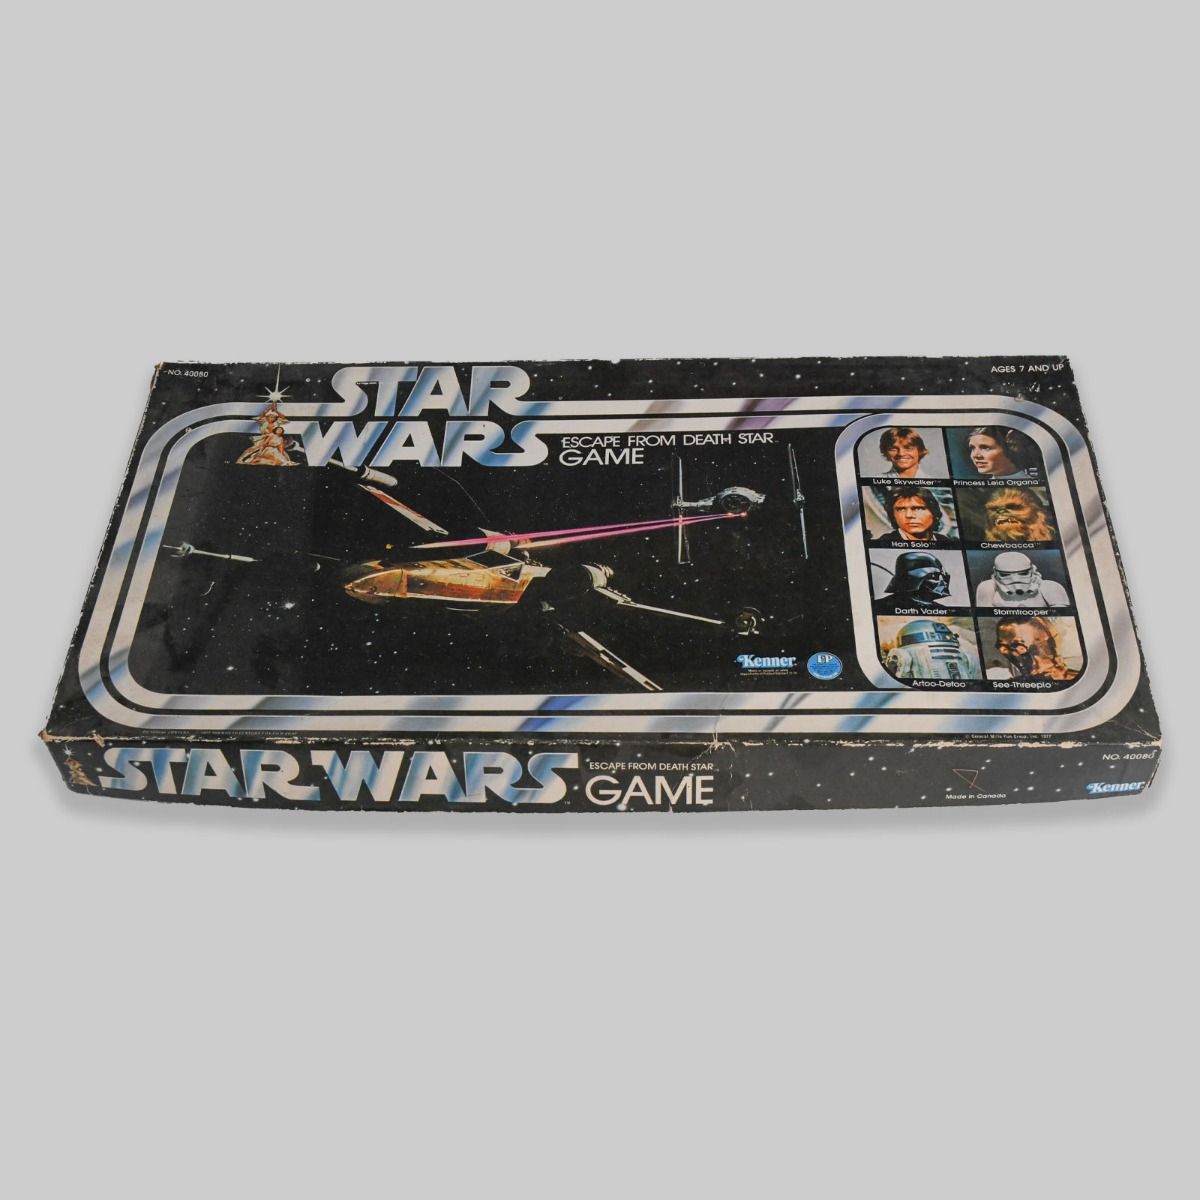 'Star Wars - Escape From Death Star' 1977 Board Game